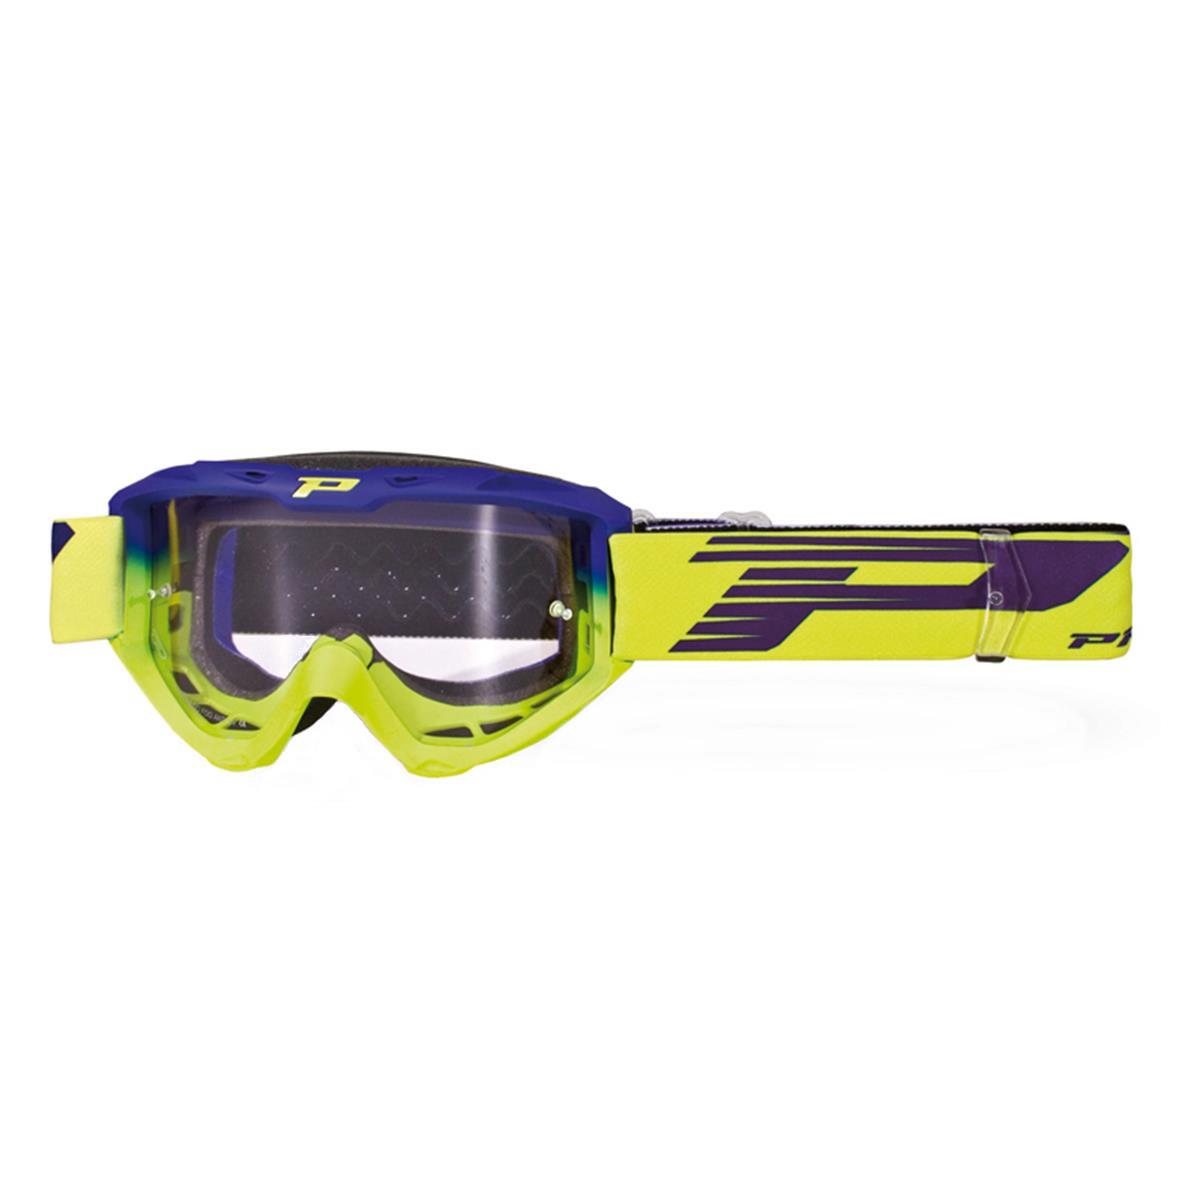 ProGrip Goggle 3450 LS Riot Yellow Fluo/Electric Blue